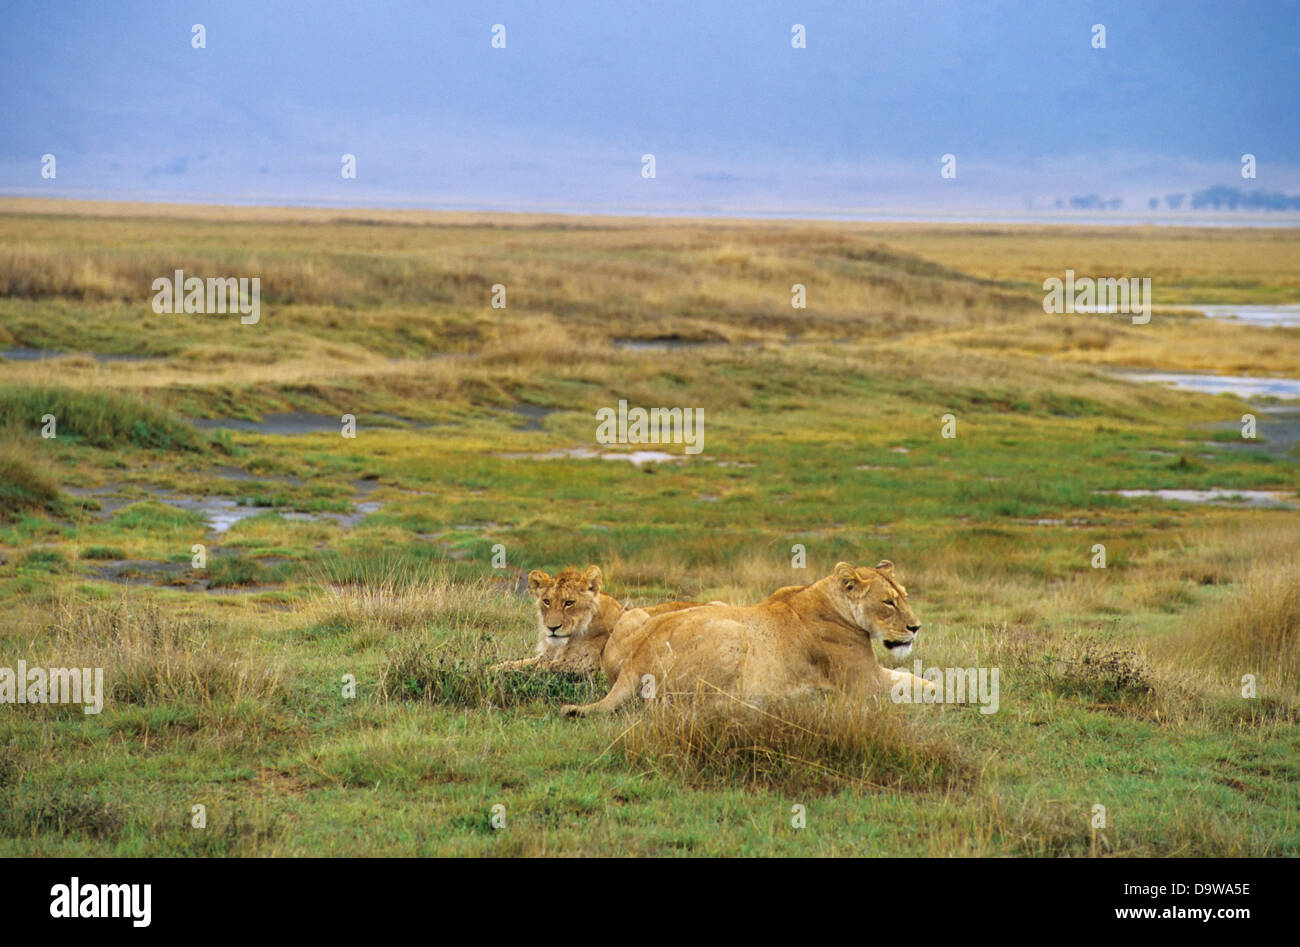 Tanzania, Ngorongoro Crater, Lioness With Young Male Lion Stock Photo